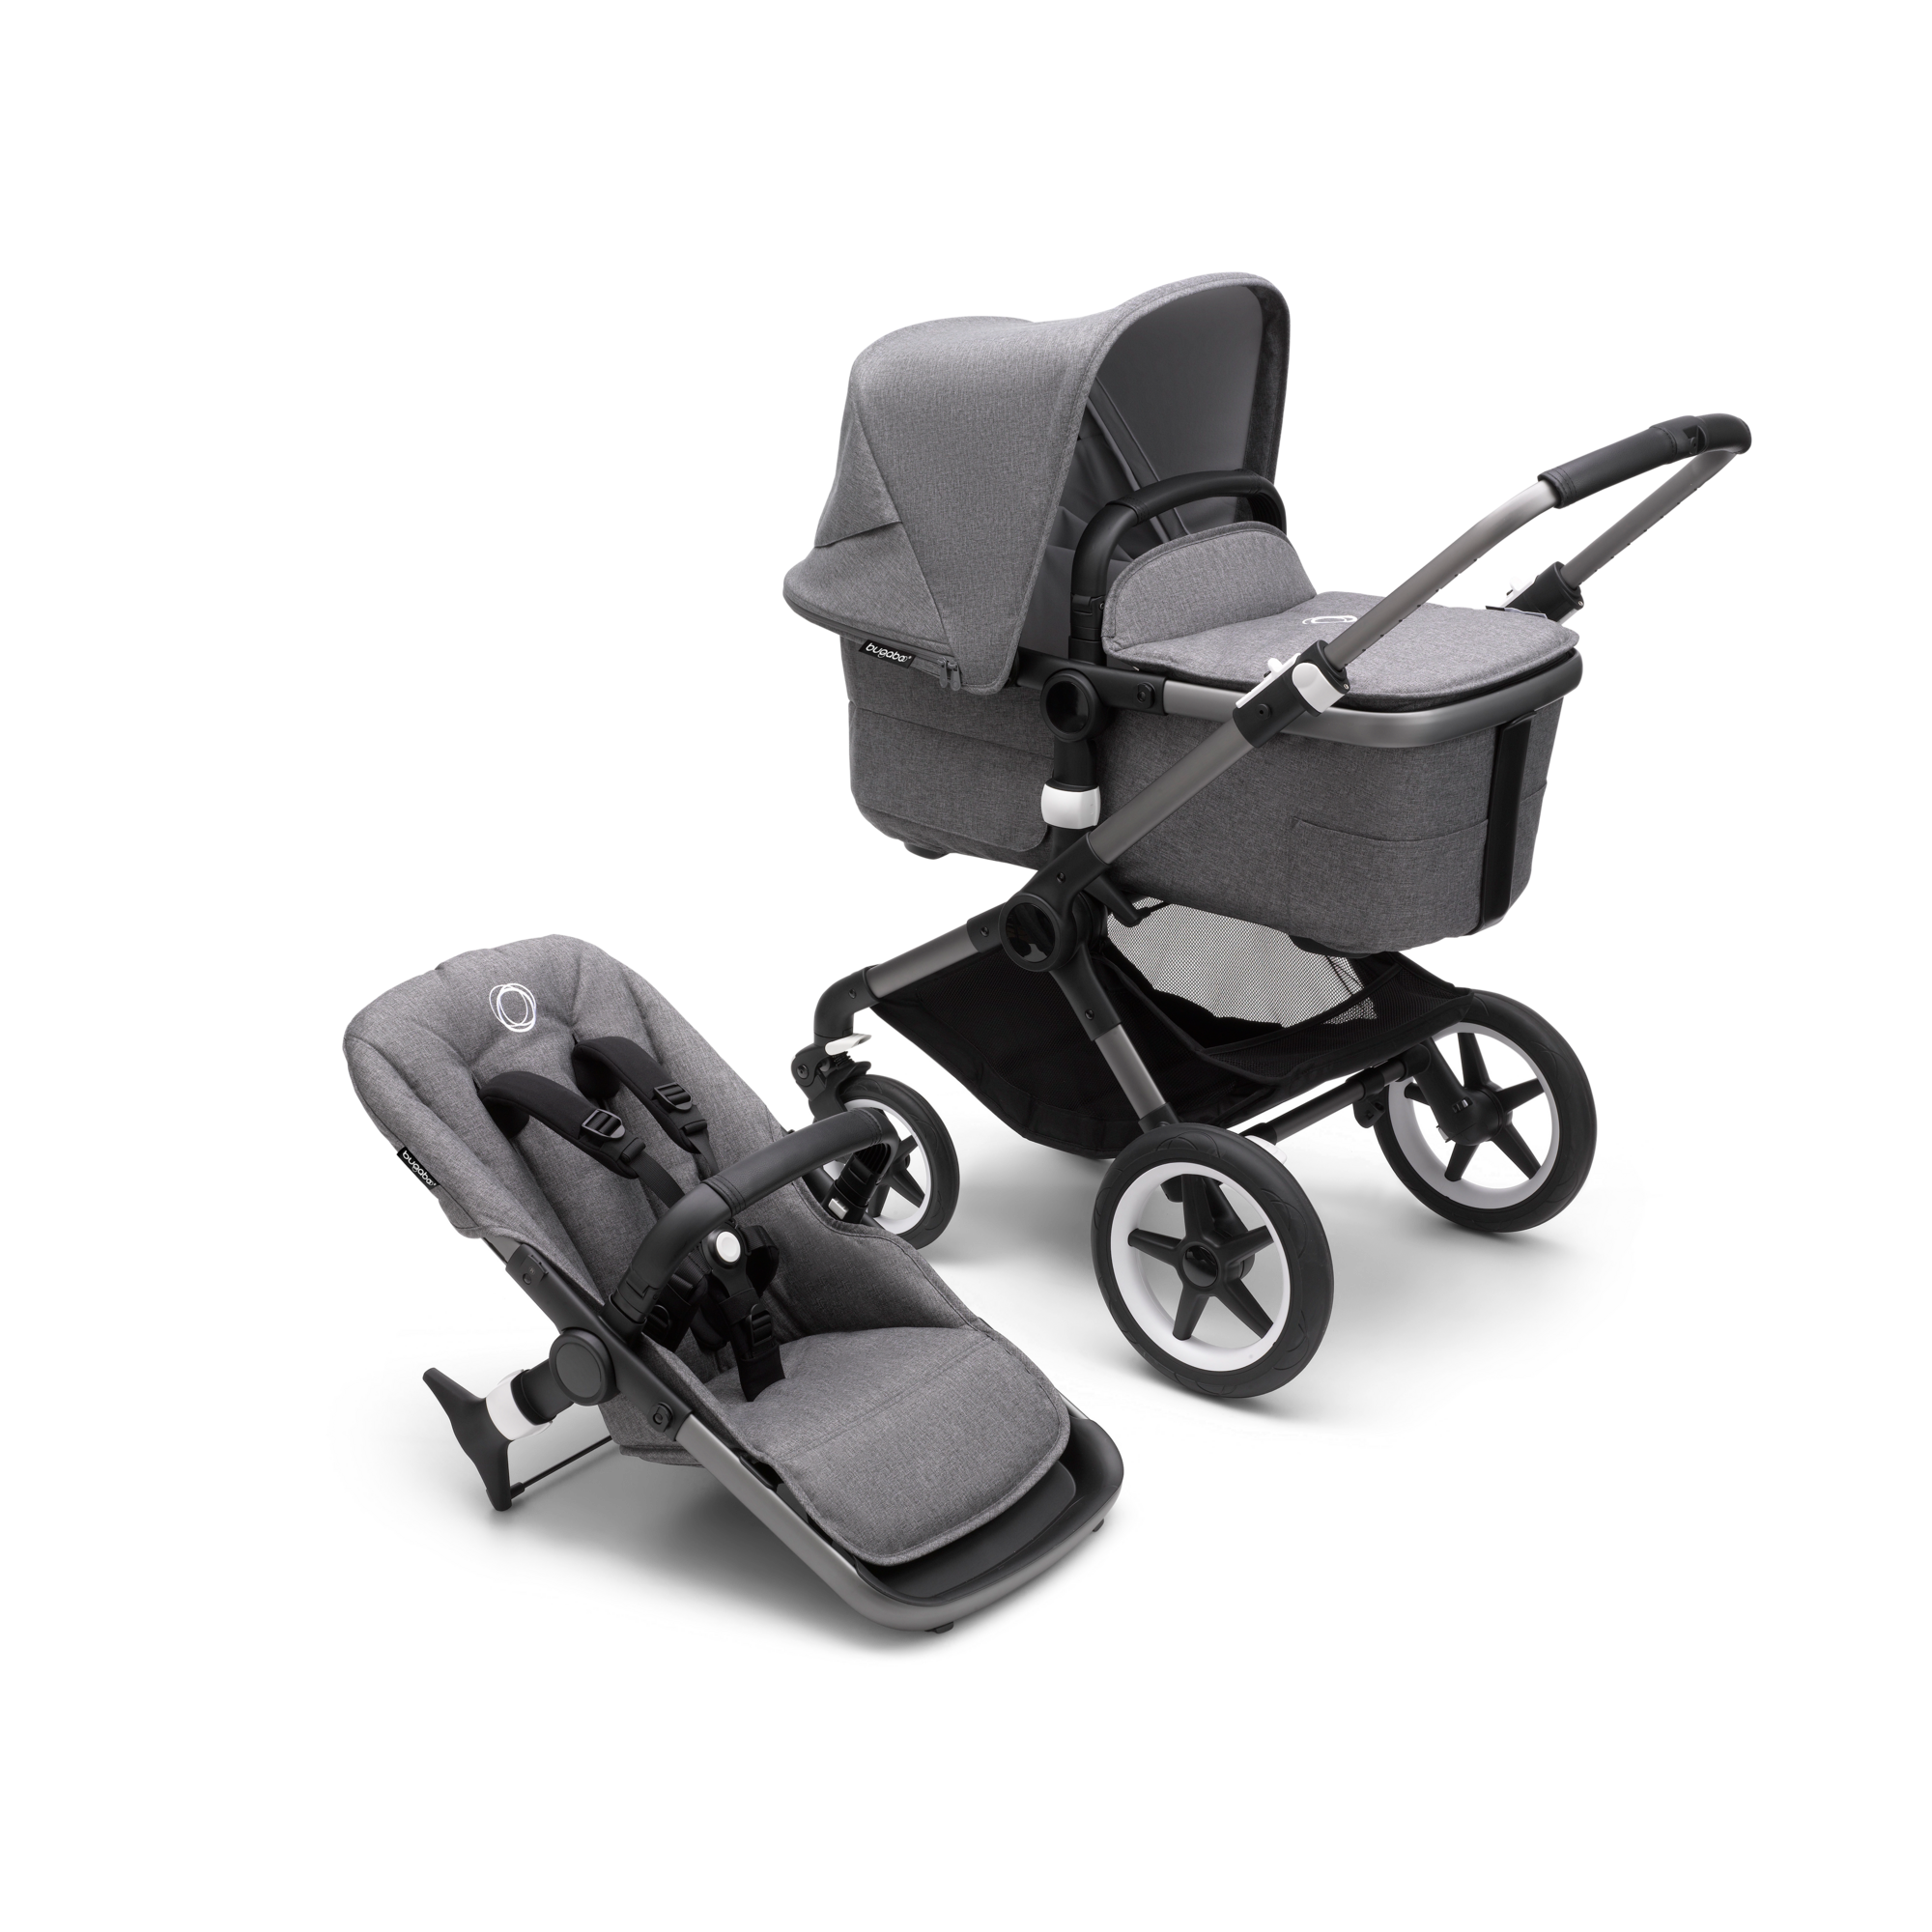 Fully-Loaded Foldable Stroller with Advanced Suspension and All-Terrain wheel Black/Grey Melange Bugaboo Fox Complete Full-Size Stroller 